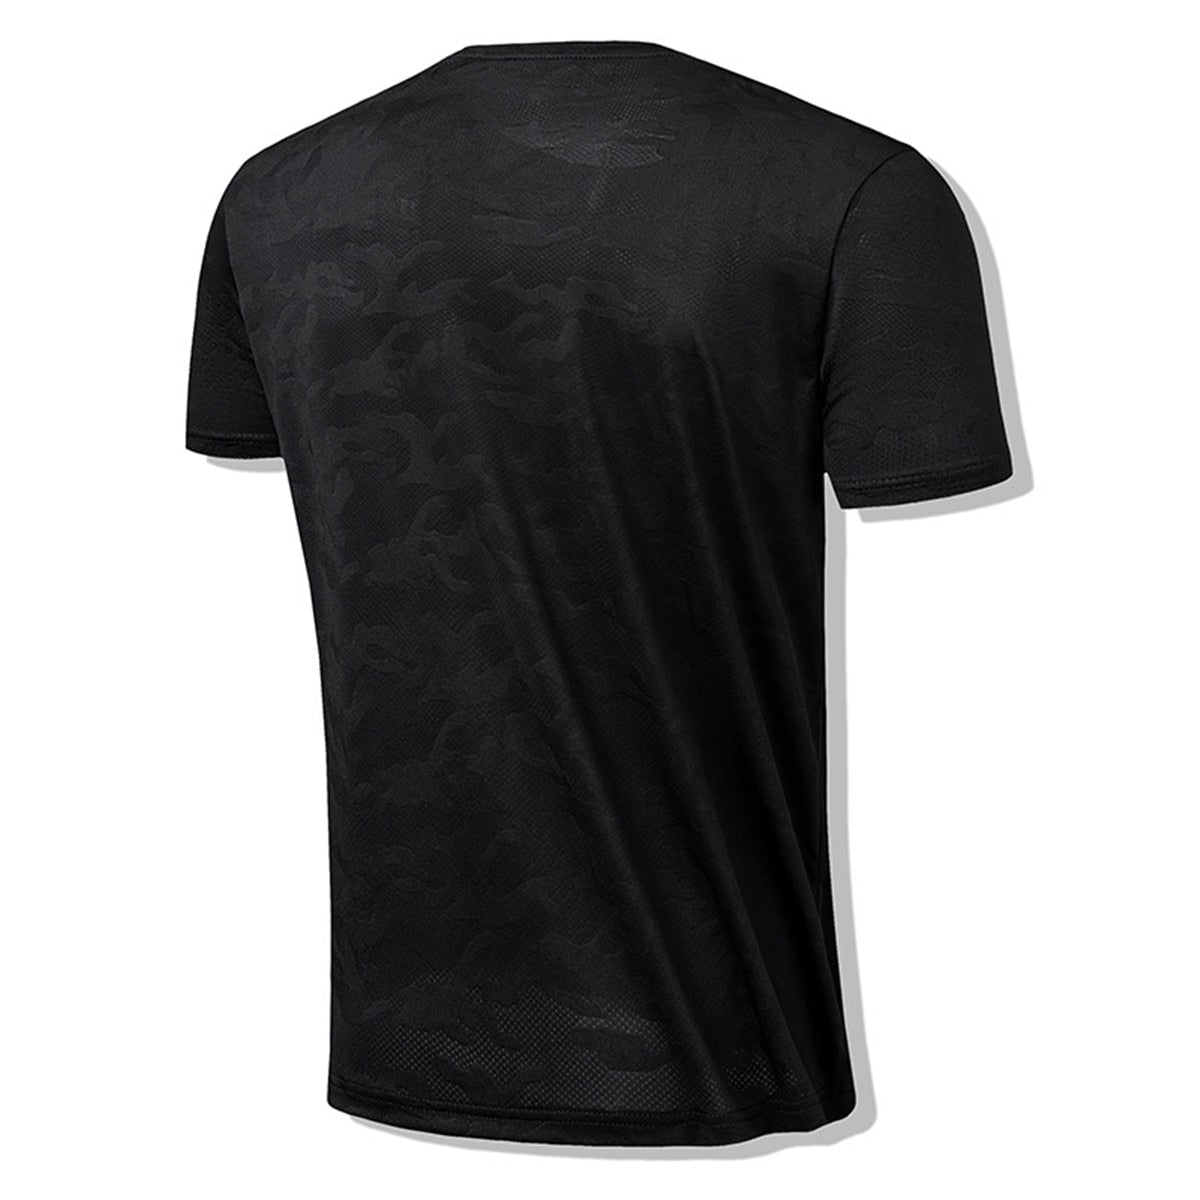 Summer Fitness Training T-shirt Men Casual Short Sleeve Shirt Male Gym Bodybuilding Tees Tops Running Sport Quick Dry Clothing